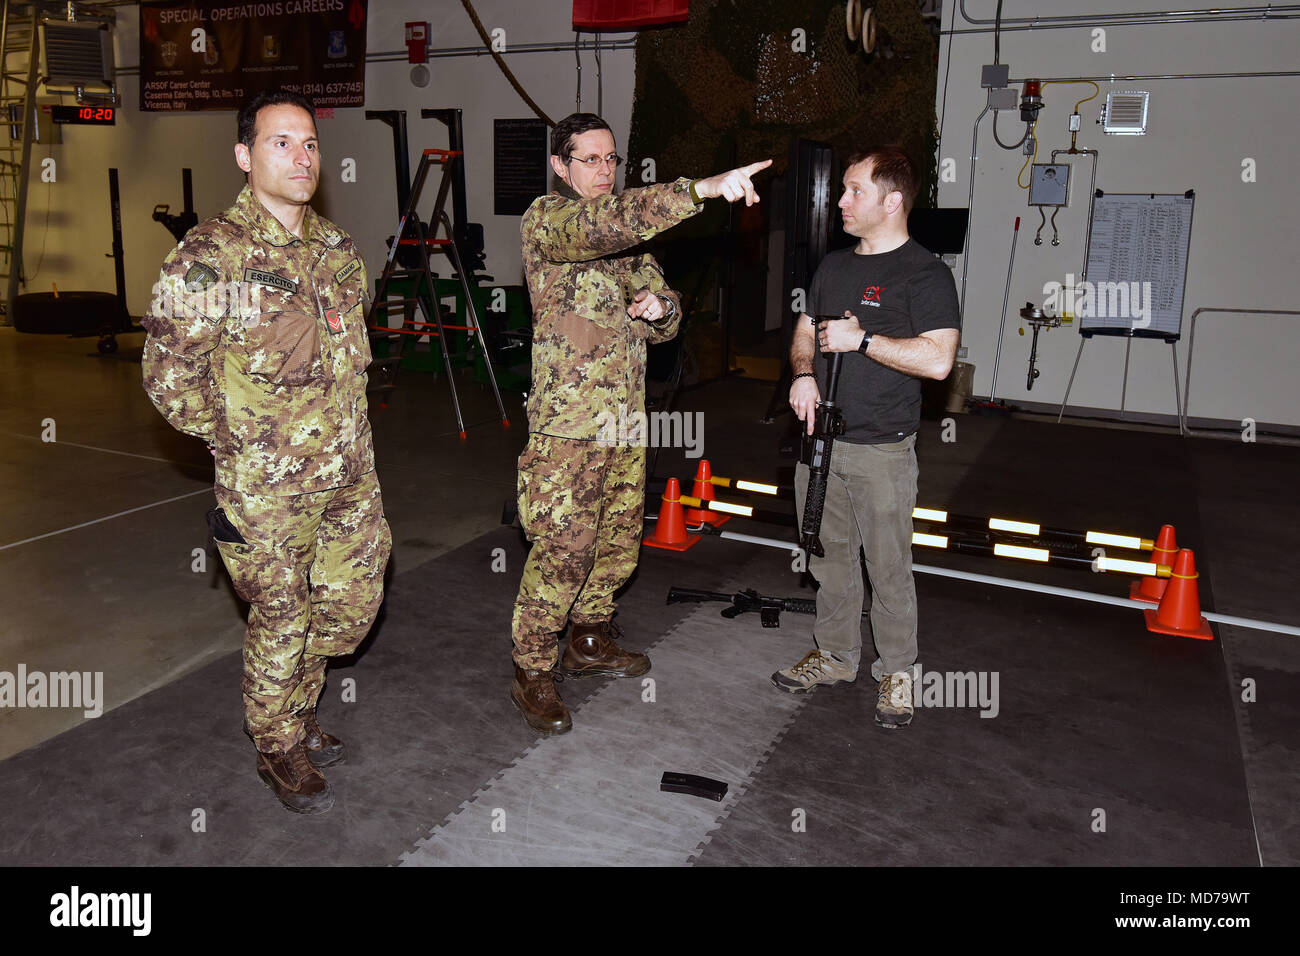 Michael Kennicker, instructor Gunfighter Gym (right), meets Lt. Col. Giuseppe Galloro Chief Training Office of the 85th Reggimento Addestramento Volontari “Verona” (center) and Caporale Maggiore Capo Scelto Damiano (left), at Gunfighter Gym , Caserma Del Din, Vicenza, Italy, March 28, 2018. Italian Soldiers use U.S. Army RTSD South equipment to enhance bilateral relations and to expand levels of cooperation and the capacity of the personnel involved in joint operations. (U.S. Army photo by Paolo Bovo) Stock Photo